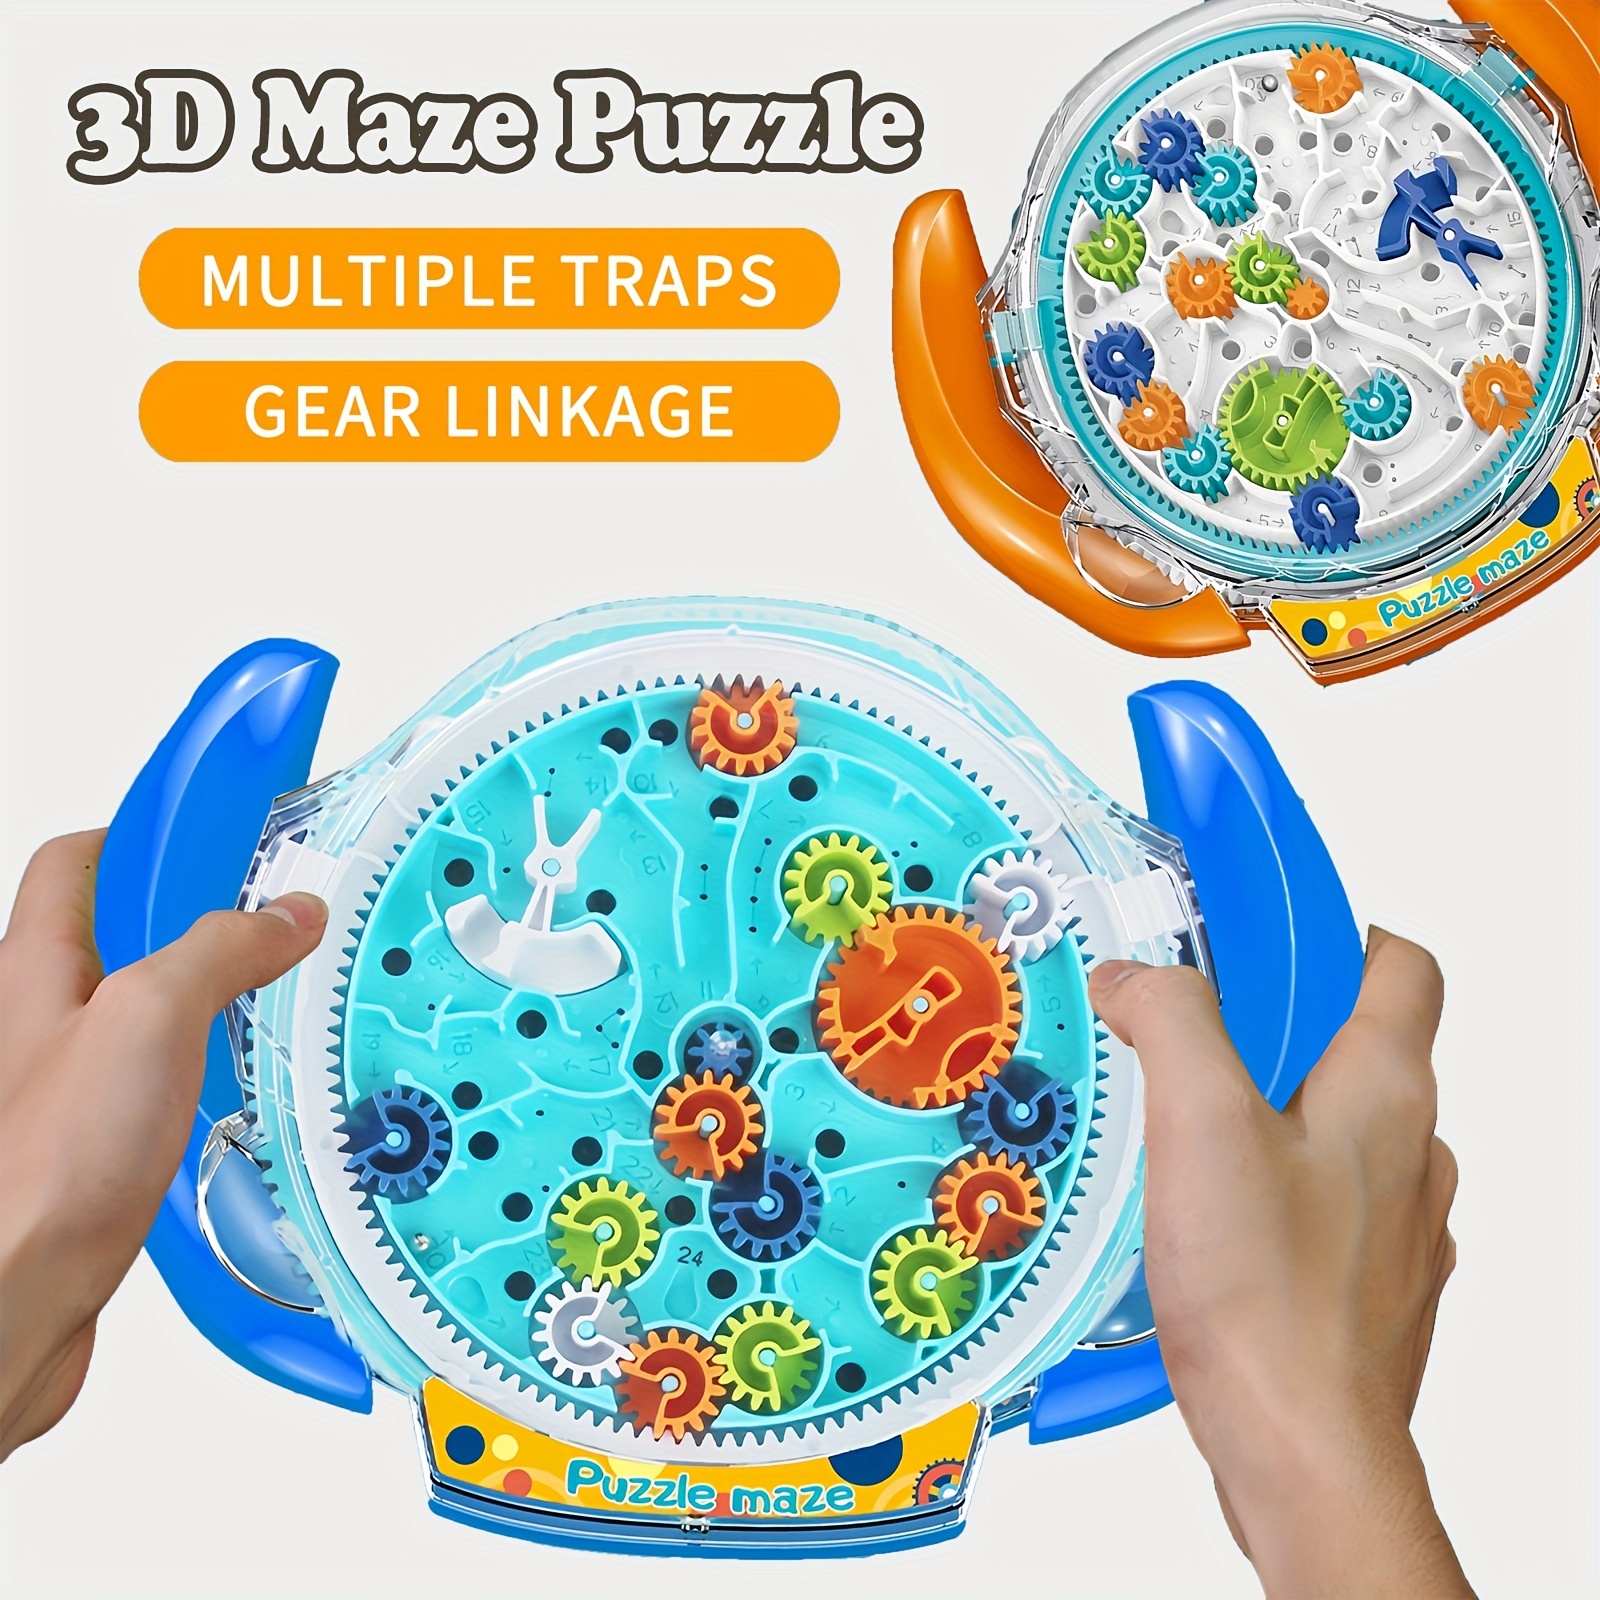 

Children's Intelligence Puzzle, Three-dimensional Maze Puzzle For Children, Brain Teasers Gravity Ball Game Maze Ball Toy Children's Toys, Maze Game Marble Maze With 2 Steel Marbles